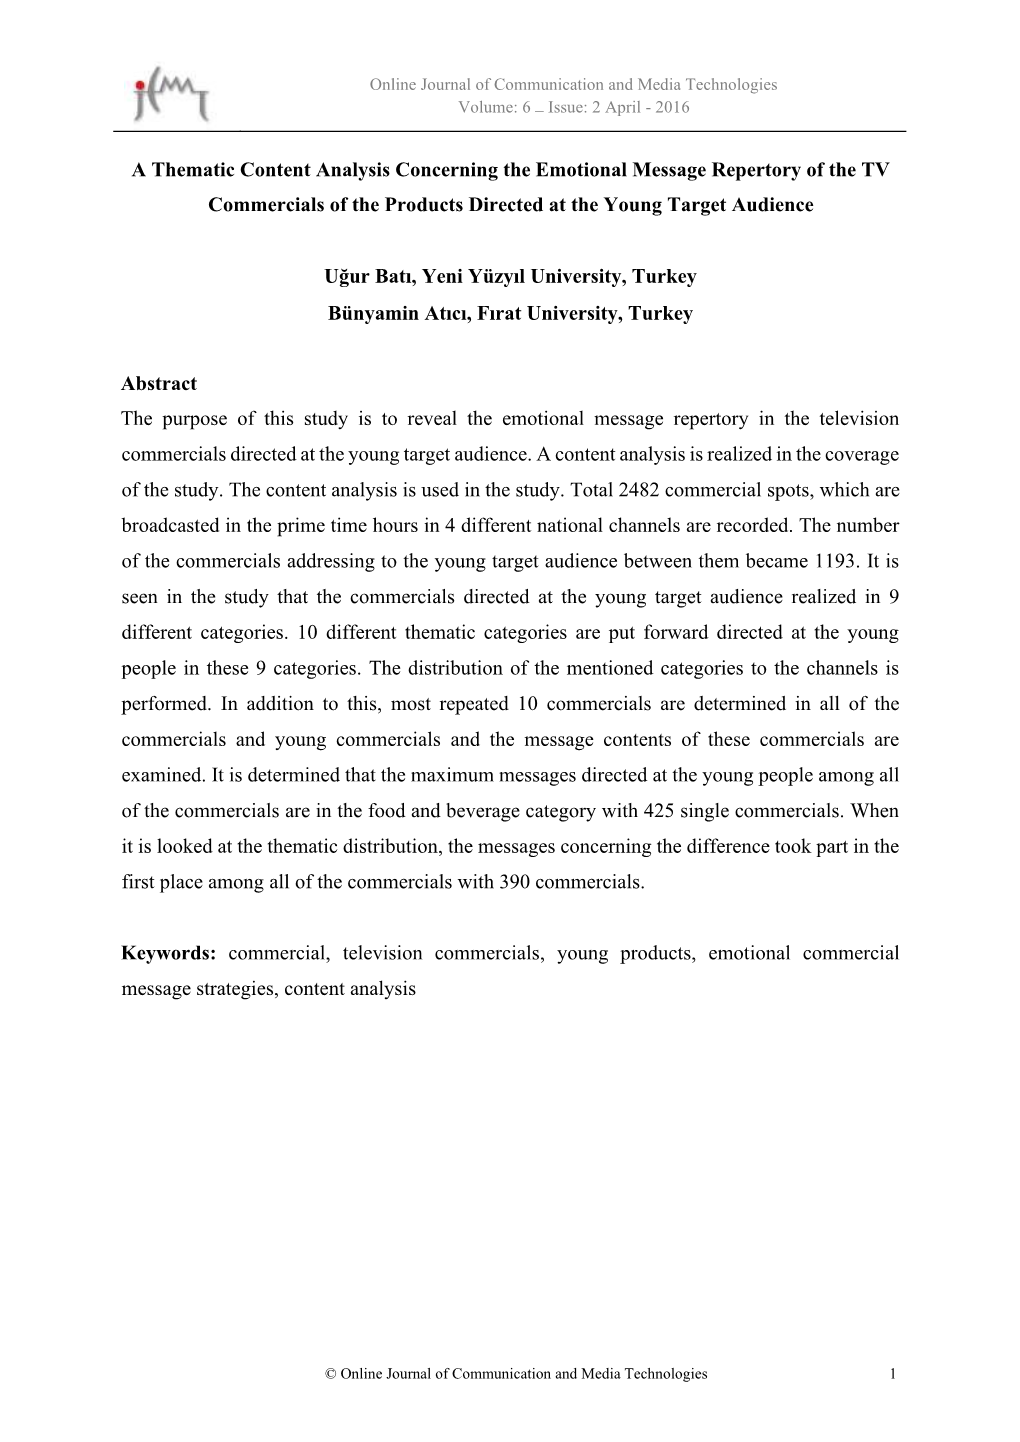 A Thematic Content Analysis Concerning the Emotional Message Repertory of the TV Commercials of the Products Directed at the Young Target Audience